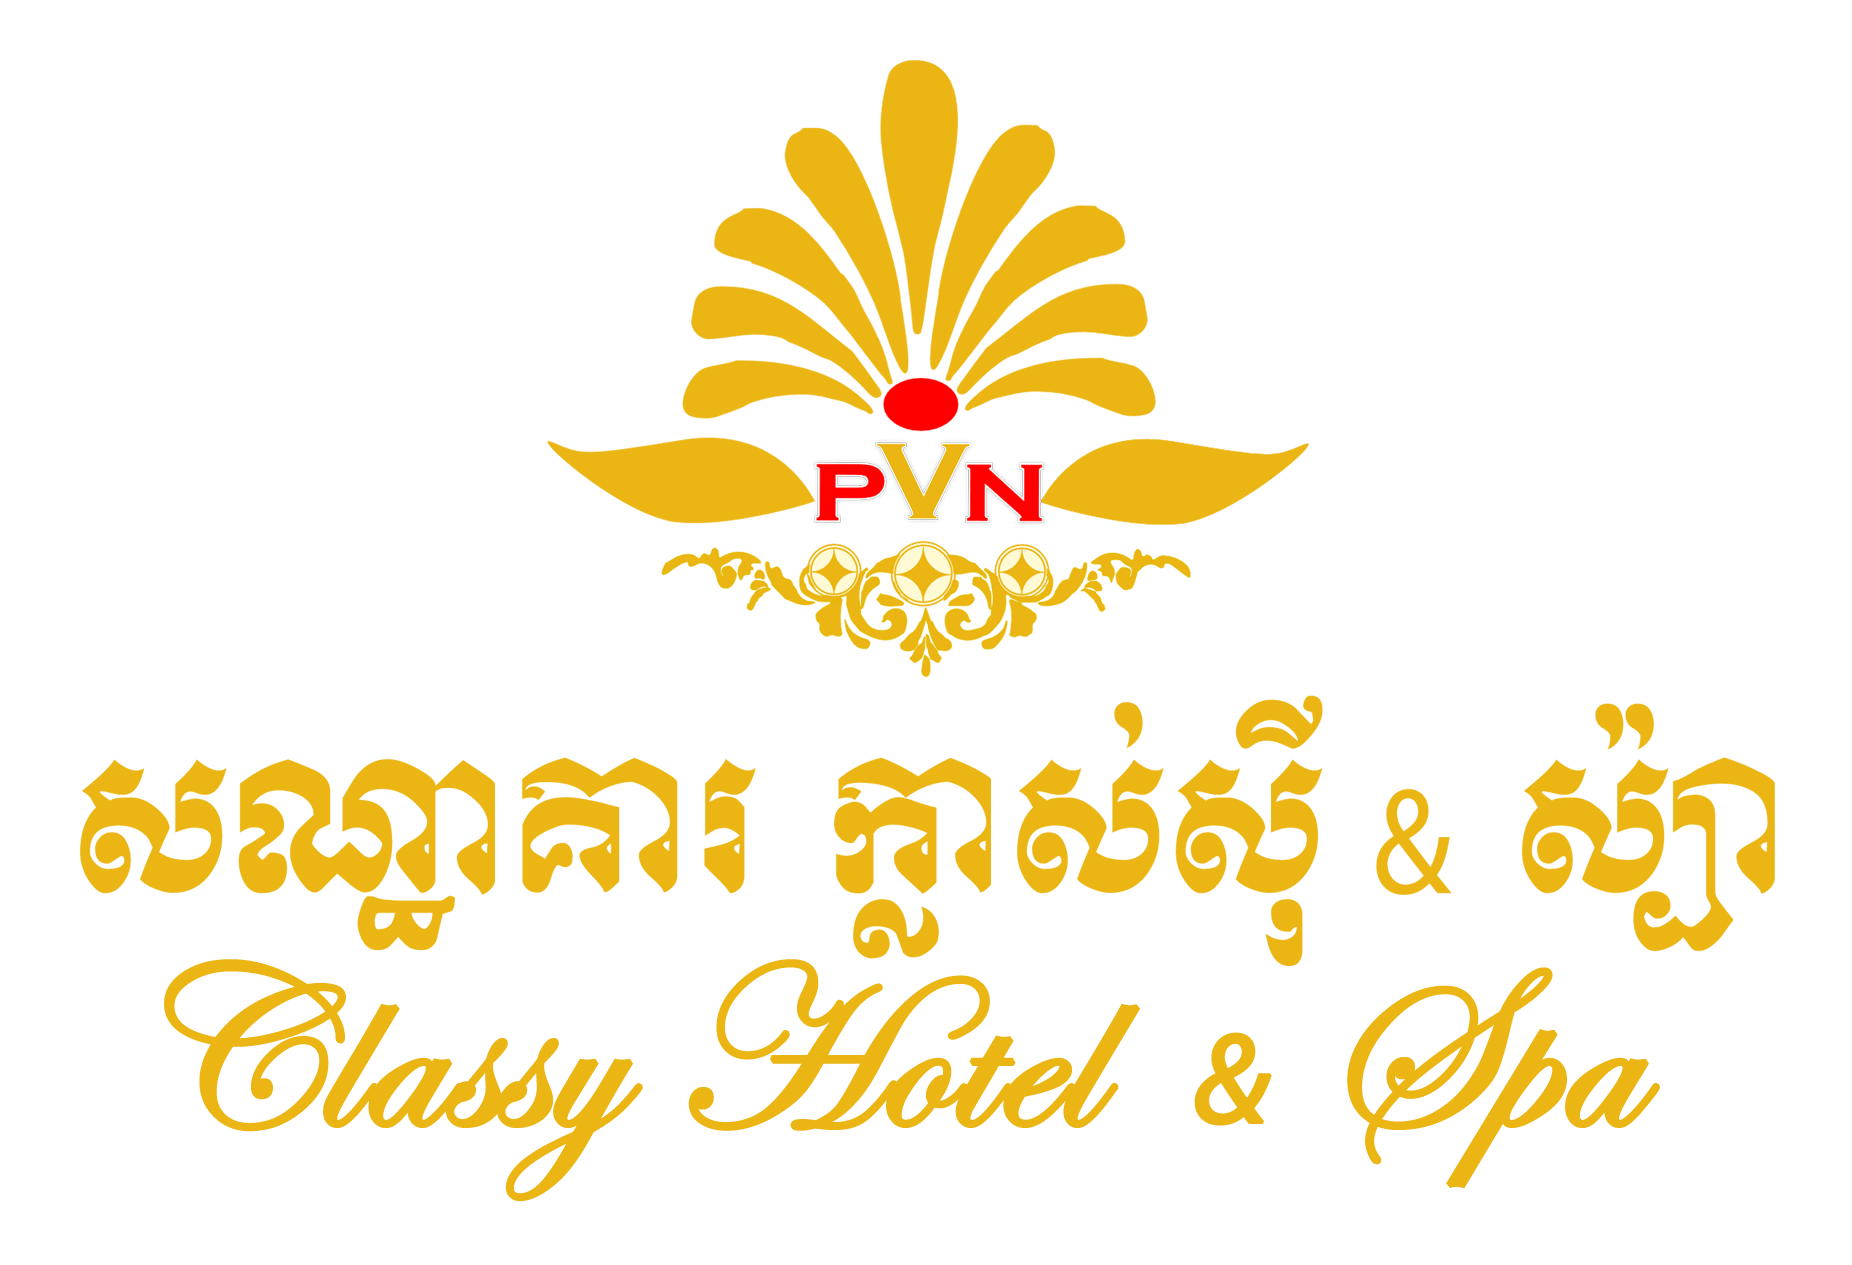 Classy Hotel & Spa | Serving you with class